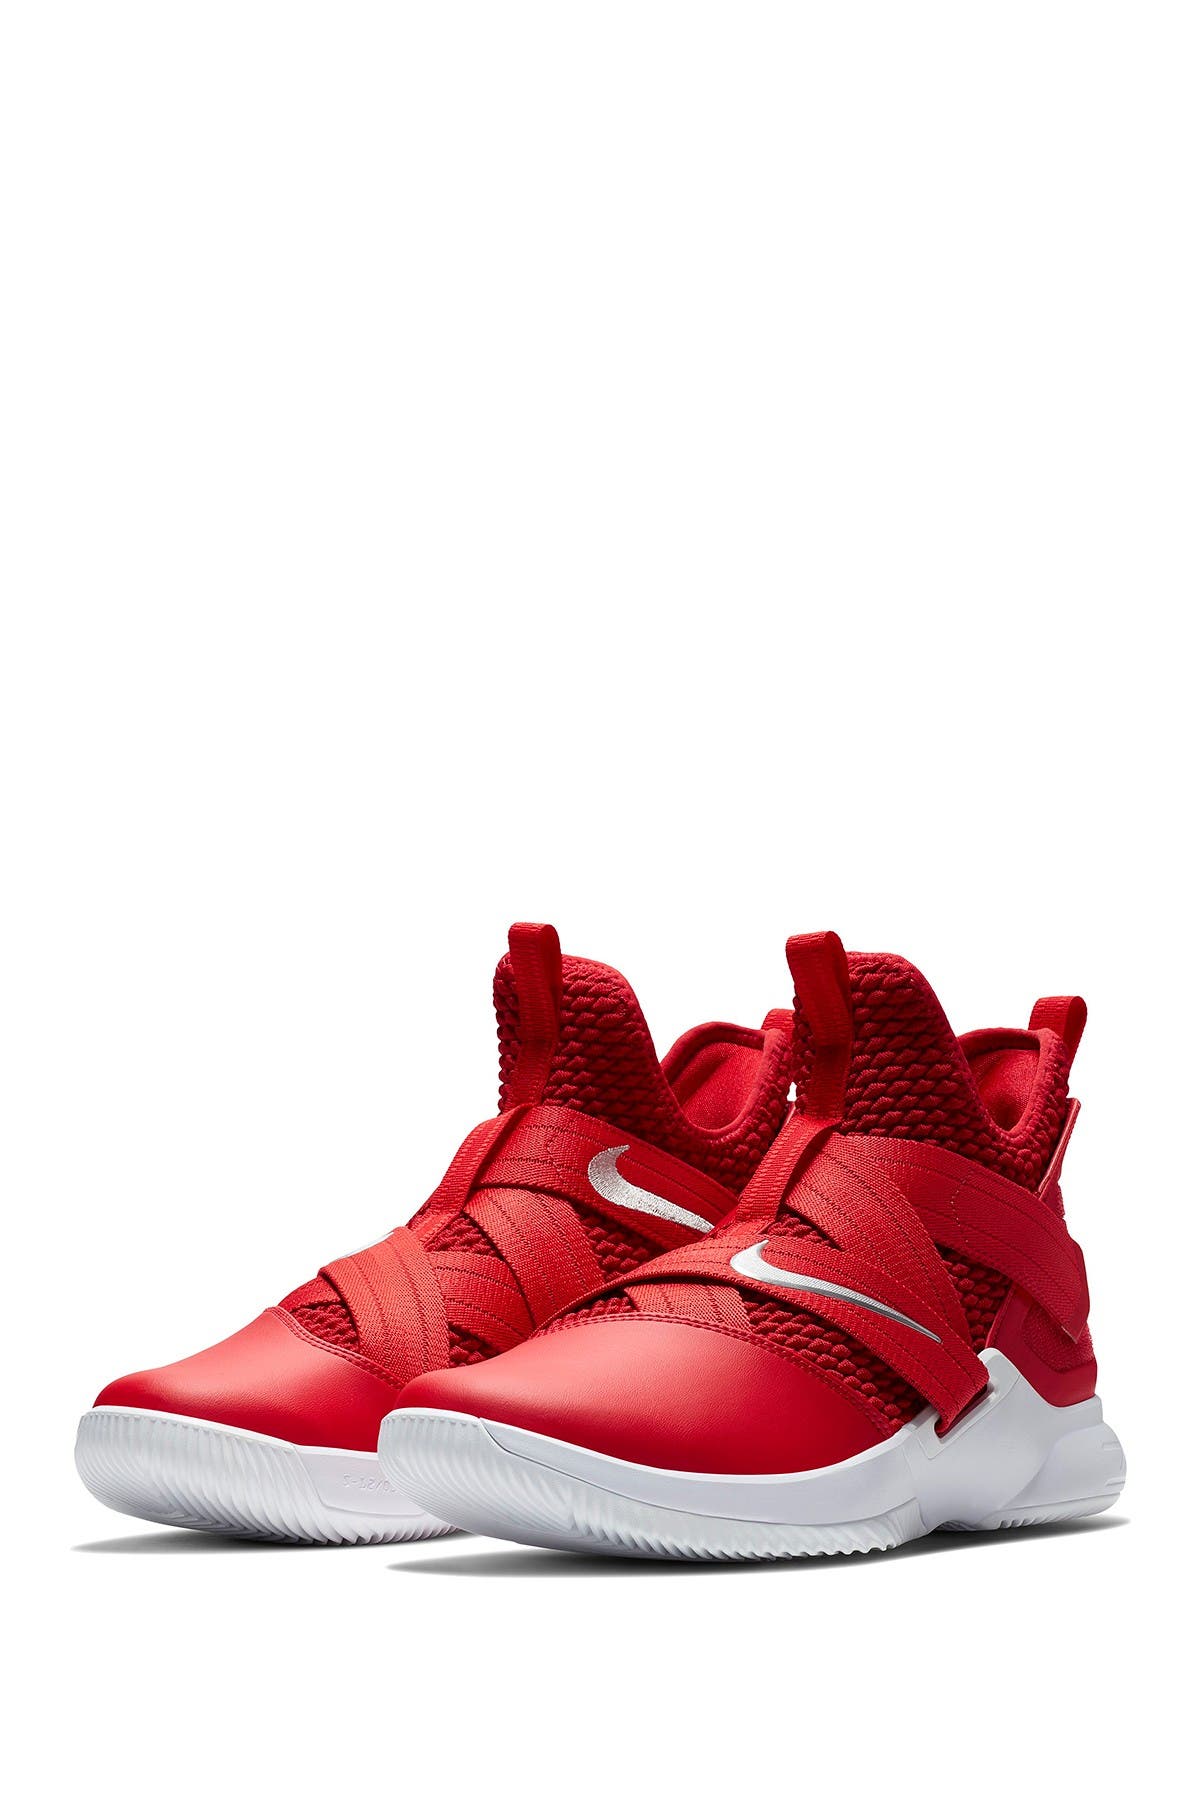 nike zoom lebron soldier xii tb